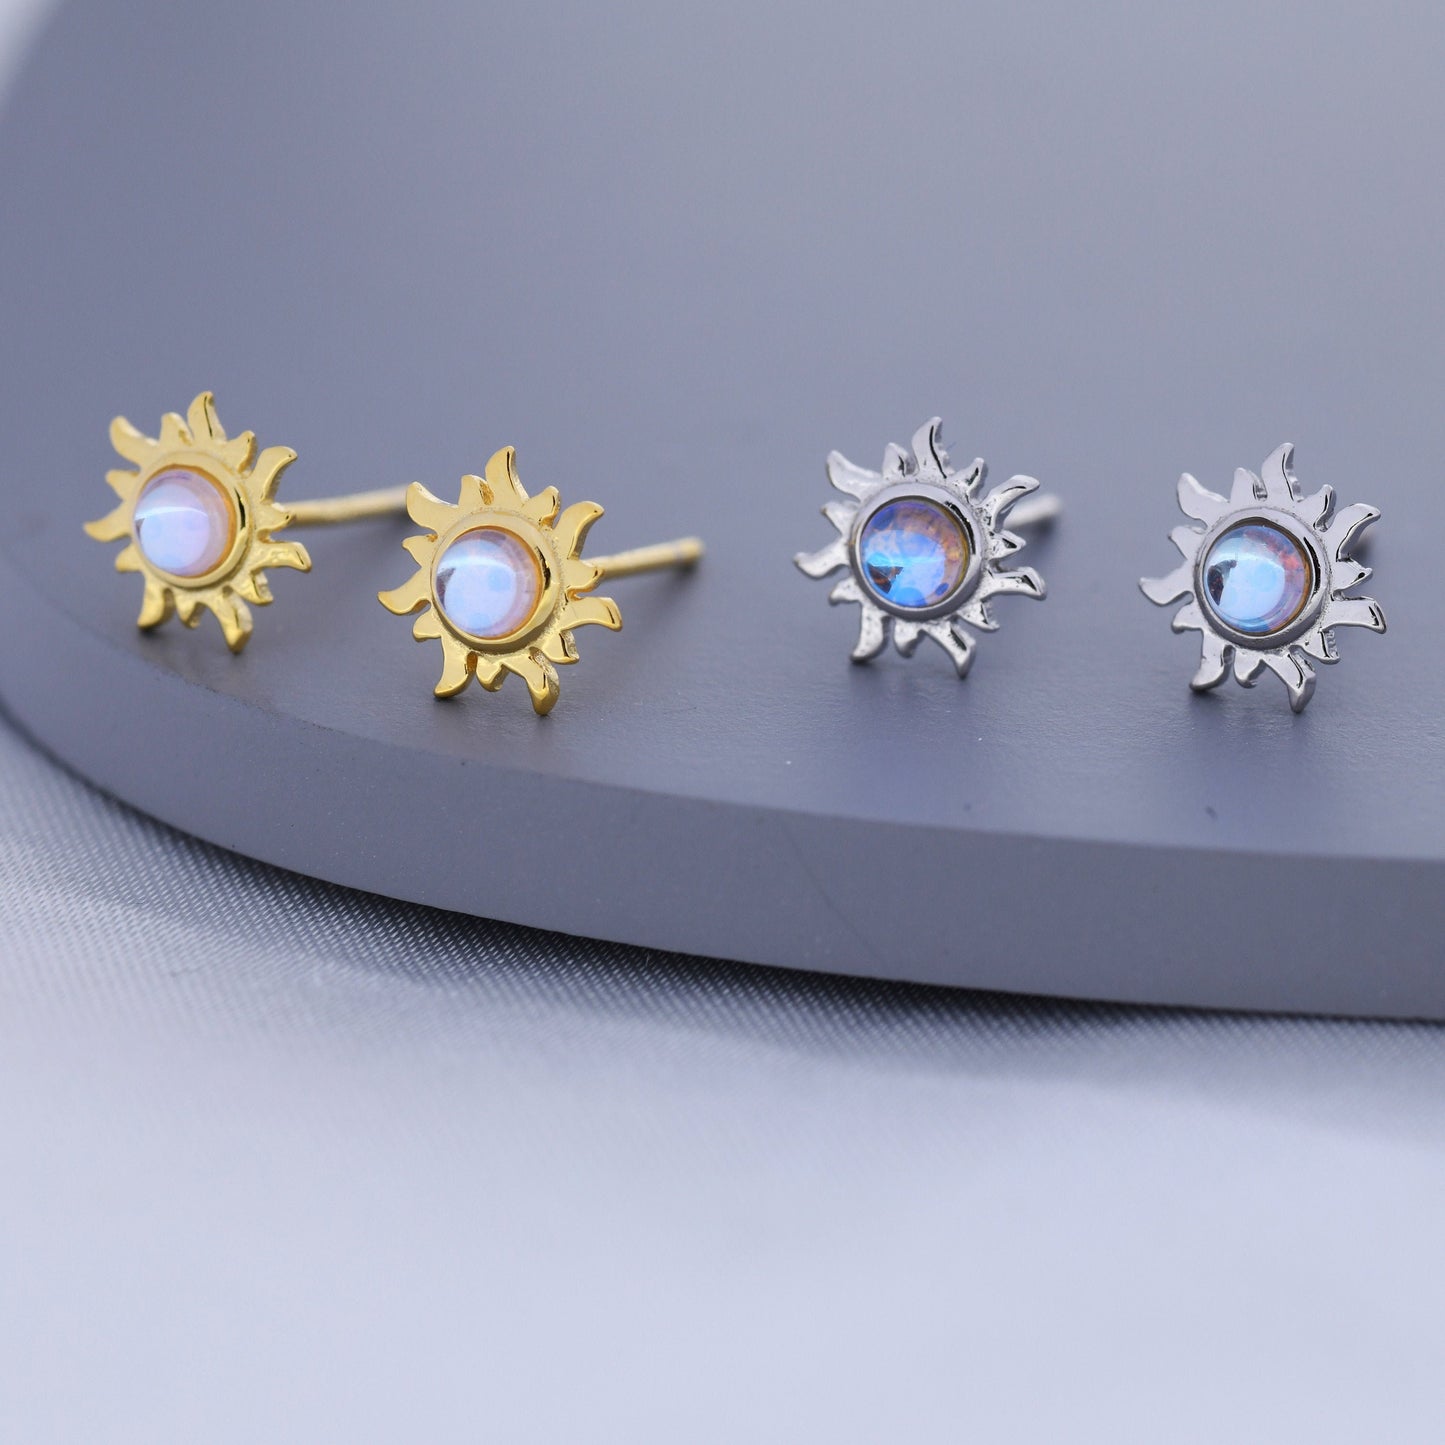 Tiny Sun Stud Earrings in Sterling Silver with Simulated Moonstone, Silver or Gold,  Sun Earrings, Celestial Earrings